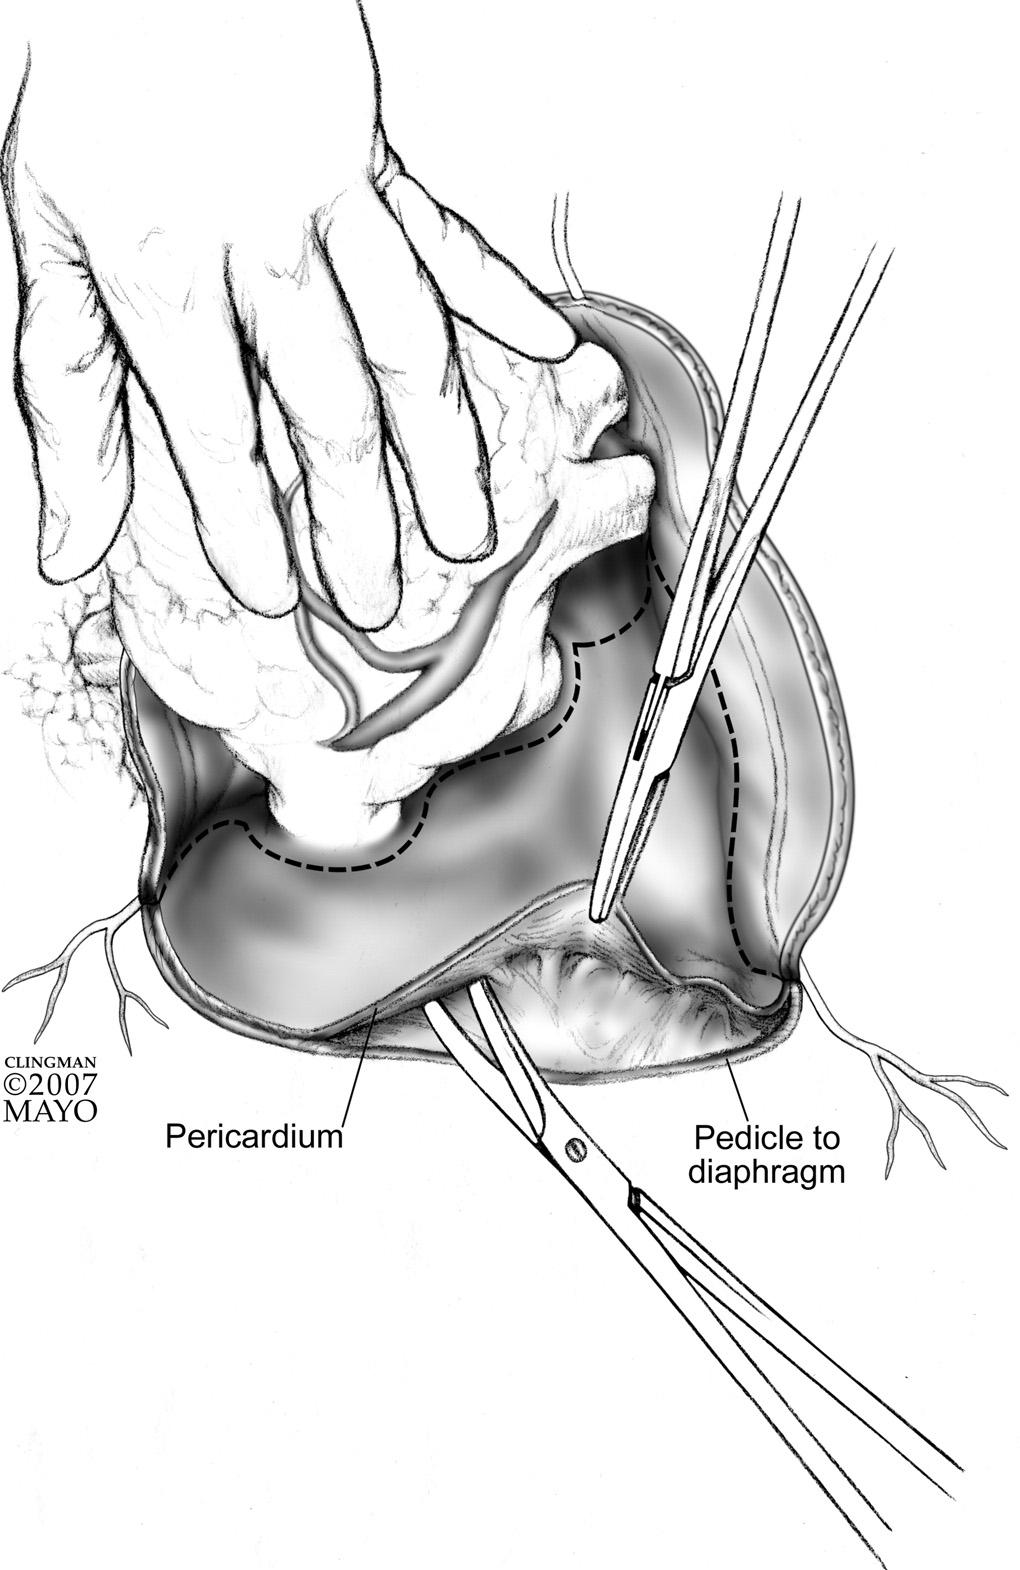 Pericardiectomy for constrictive or recurrent inflammatory pericarditis 11 Figure 9 Dissection then proceeds with removing the inferior pericardium off of the diaphragm.